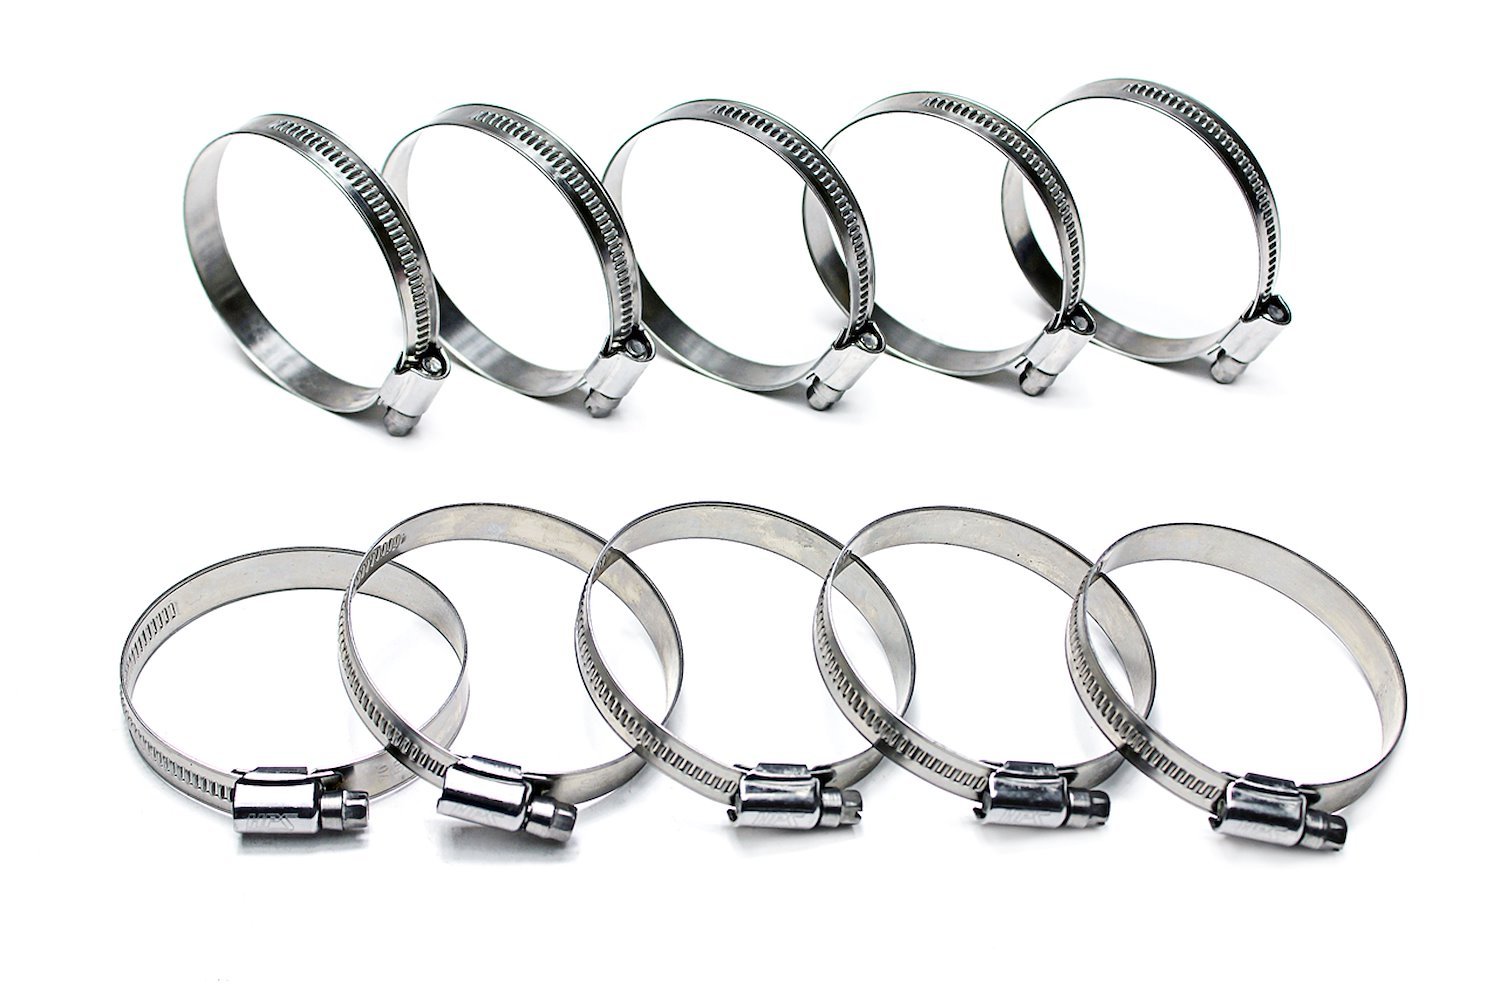 EMSC-16-27x10 Embossed Hose Clamp, Stainless Steel Embossed Hose Clamp, Size #10, Effective Range: 3/4 in.- 1-1/8 in., 10Pc